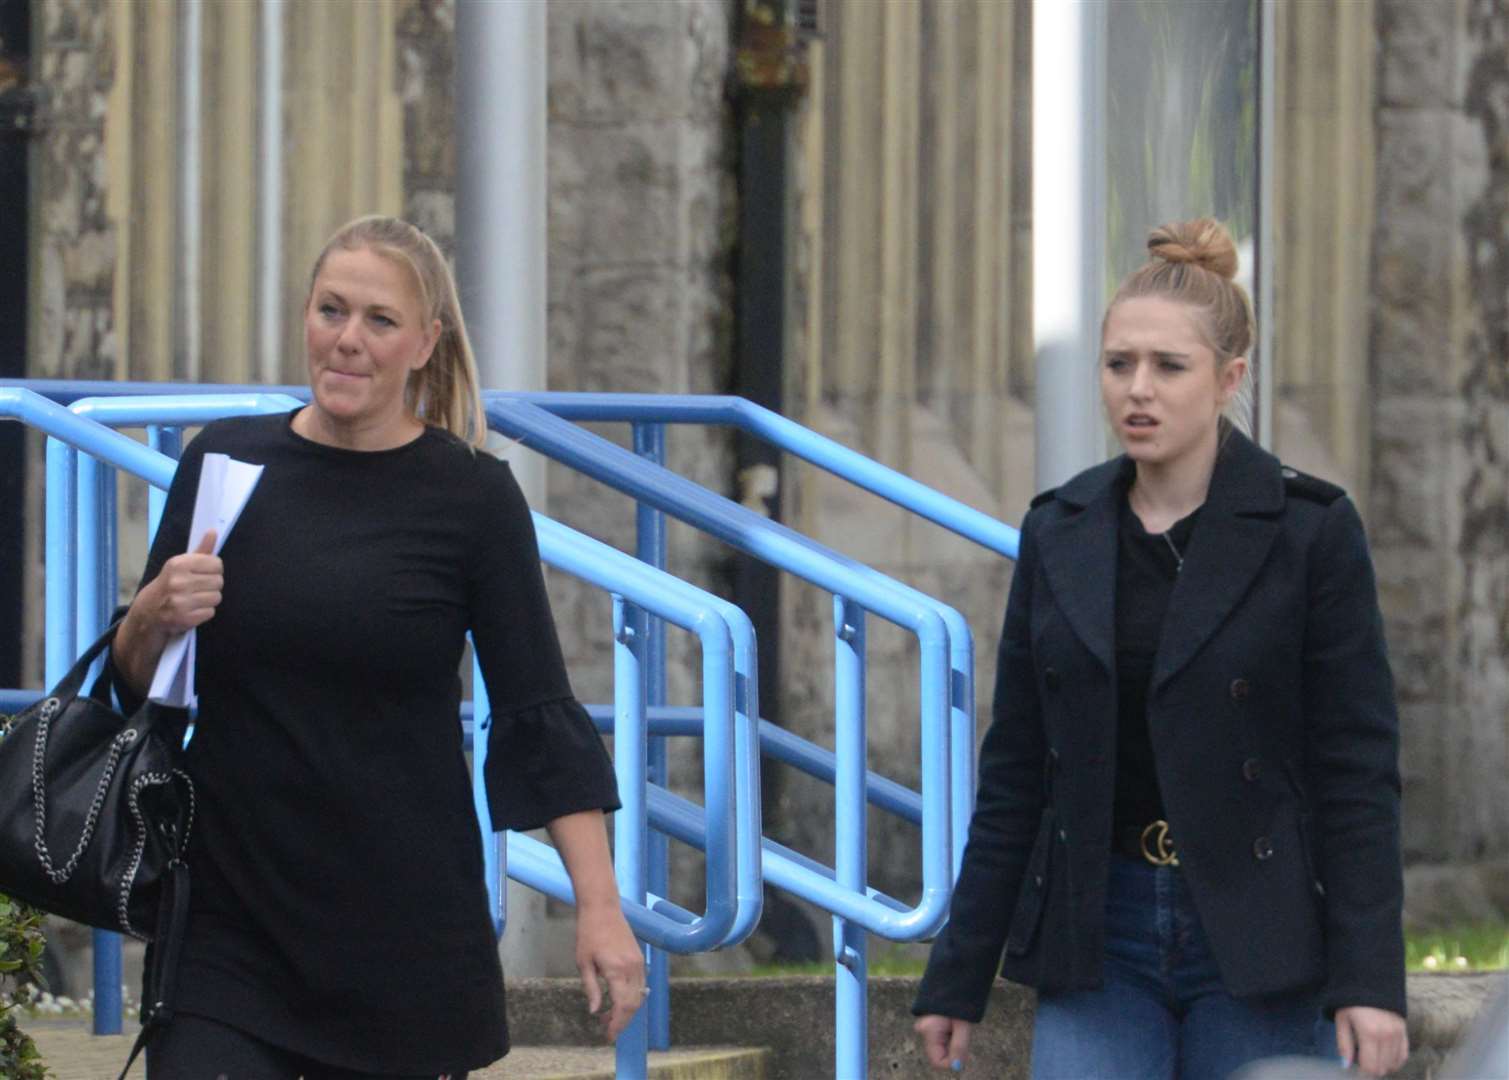 Julie and Olivia Cooke arriving at Maidstone Magistrates Court